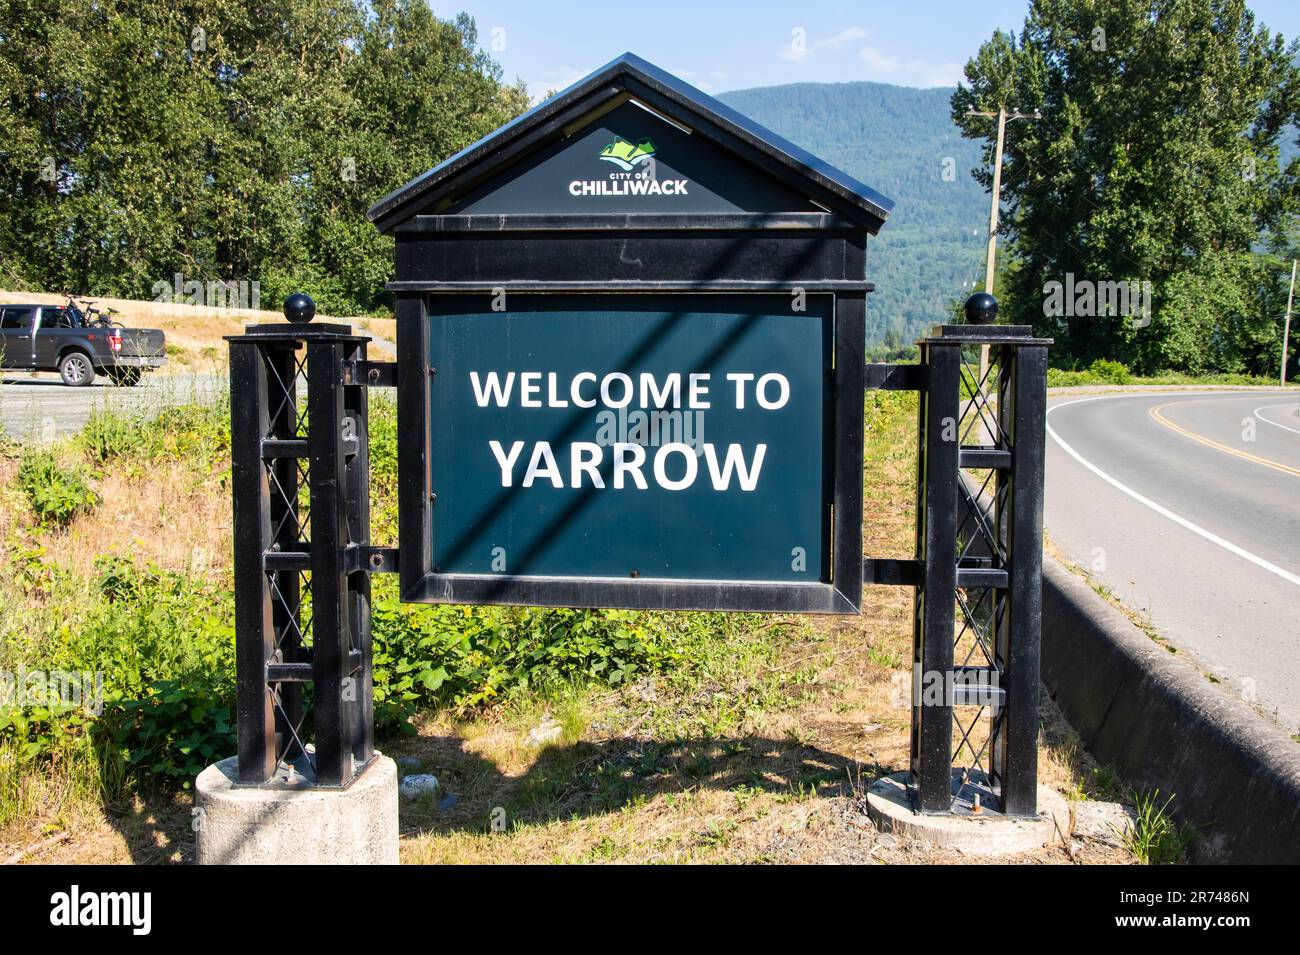 Welcome to Yarrow town sign in Chilliwack, British Columbia, Canada Stock Photo